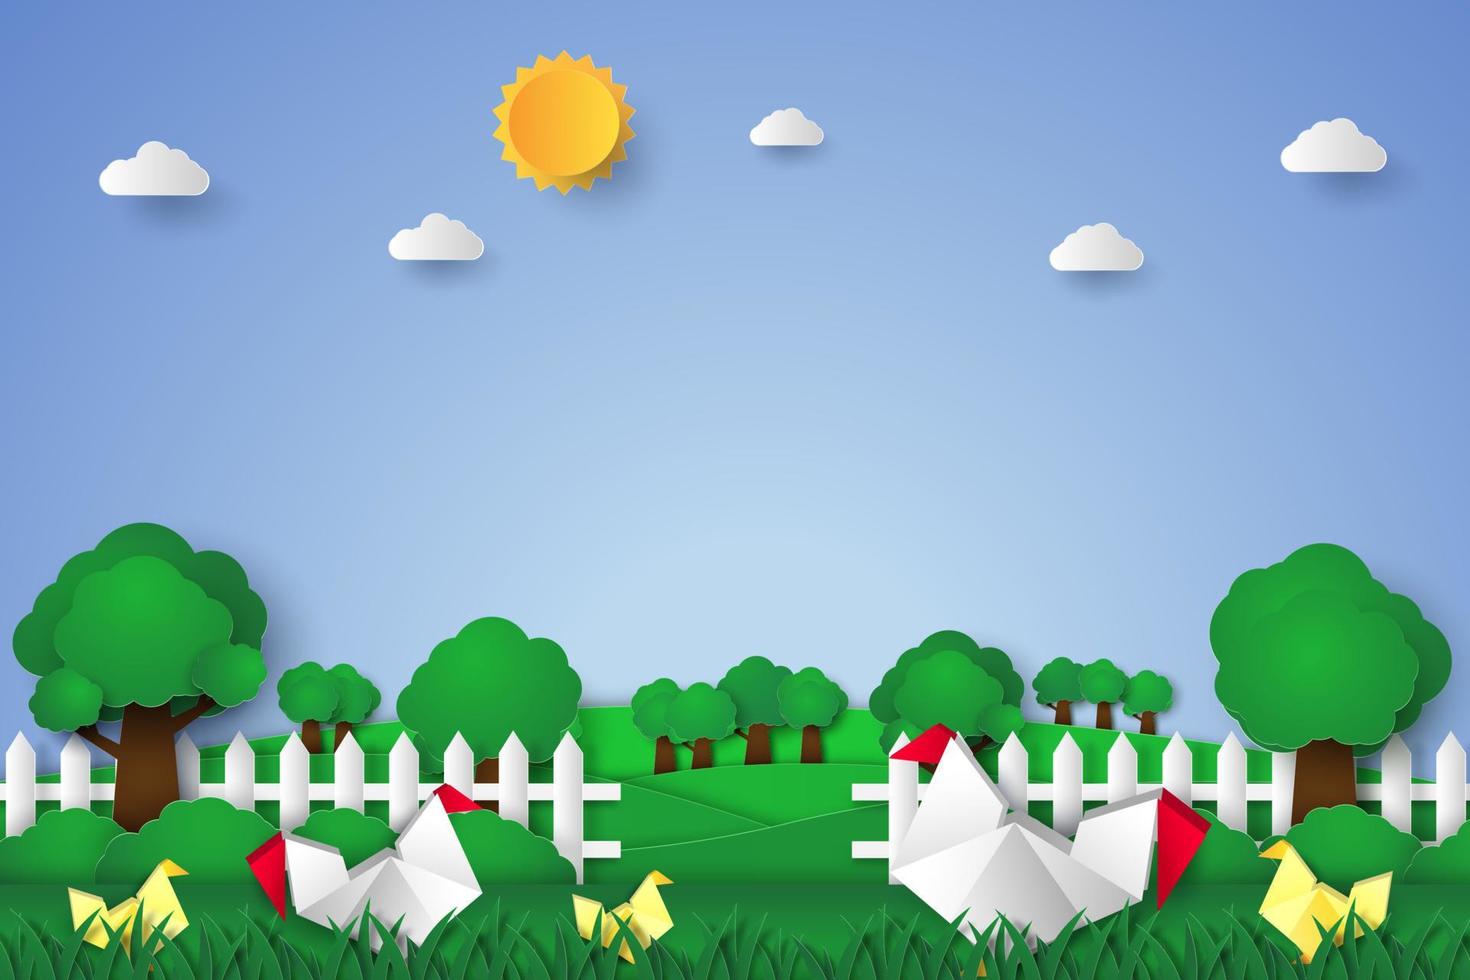 Spring Time, landscape, origami chicken and chicks in the garden with trees, plant pots, beautiful flowers on grass and fence, bird on the branch, paper art style vector